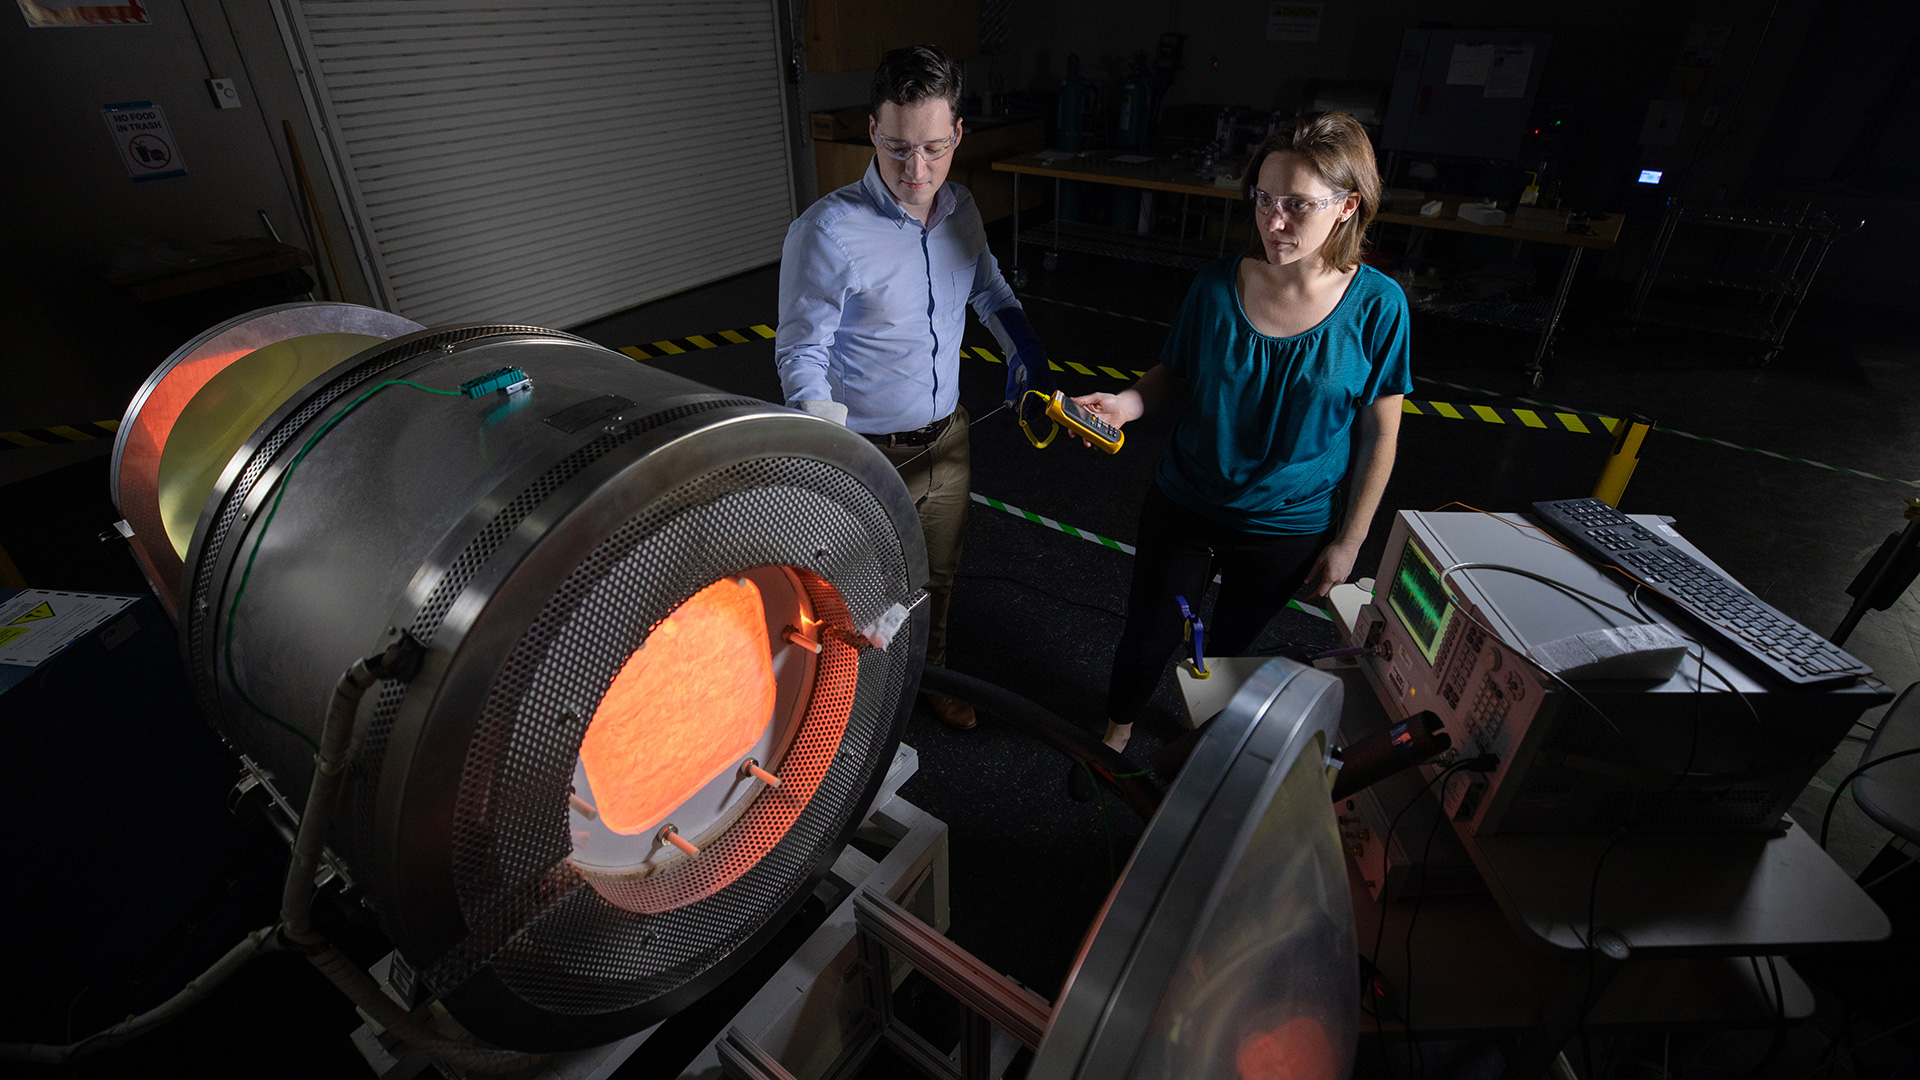 Two research standing behind large furnace device glowing red.